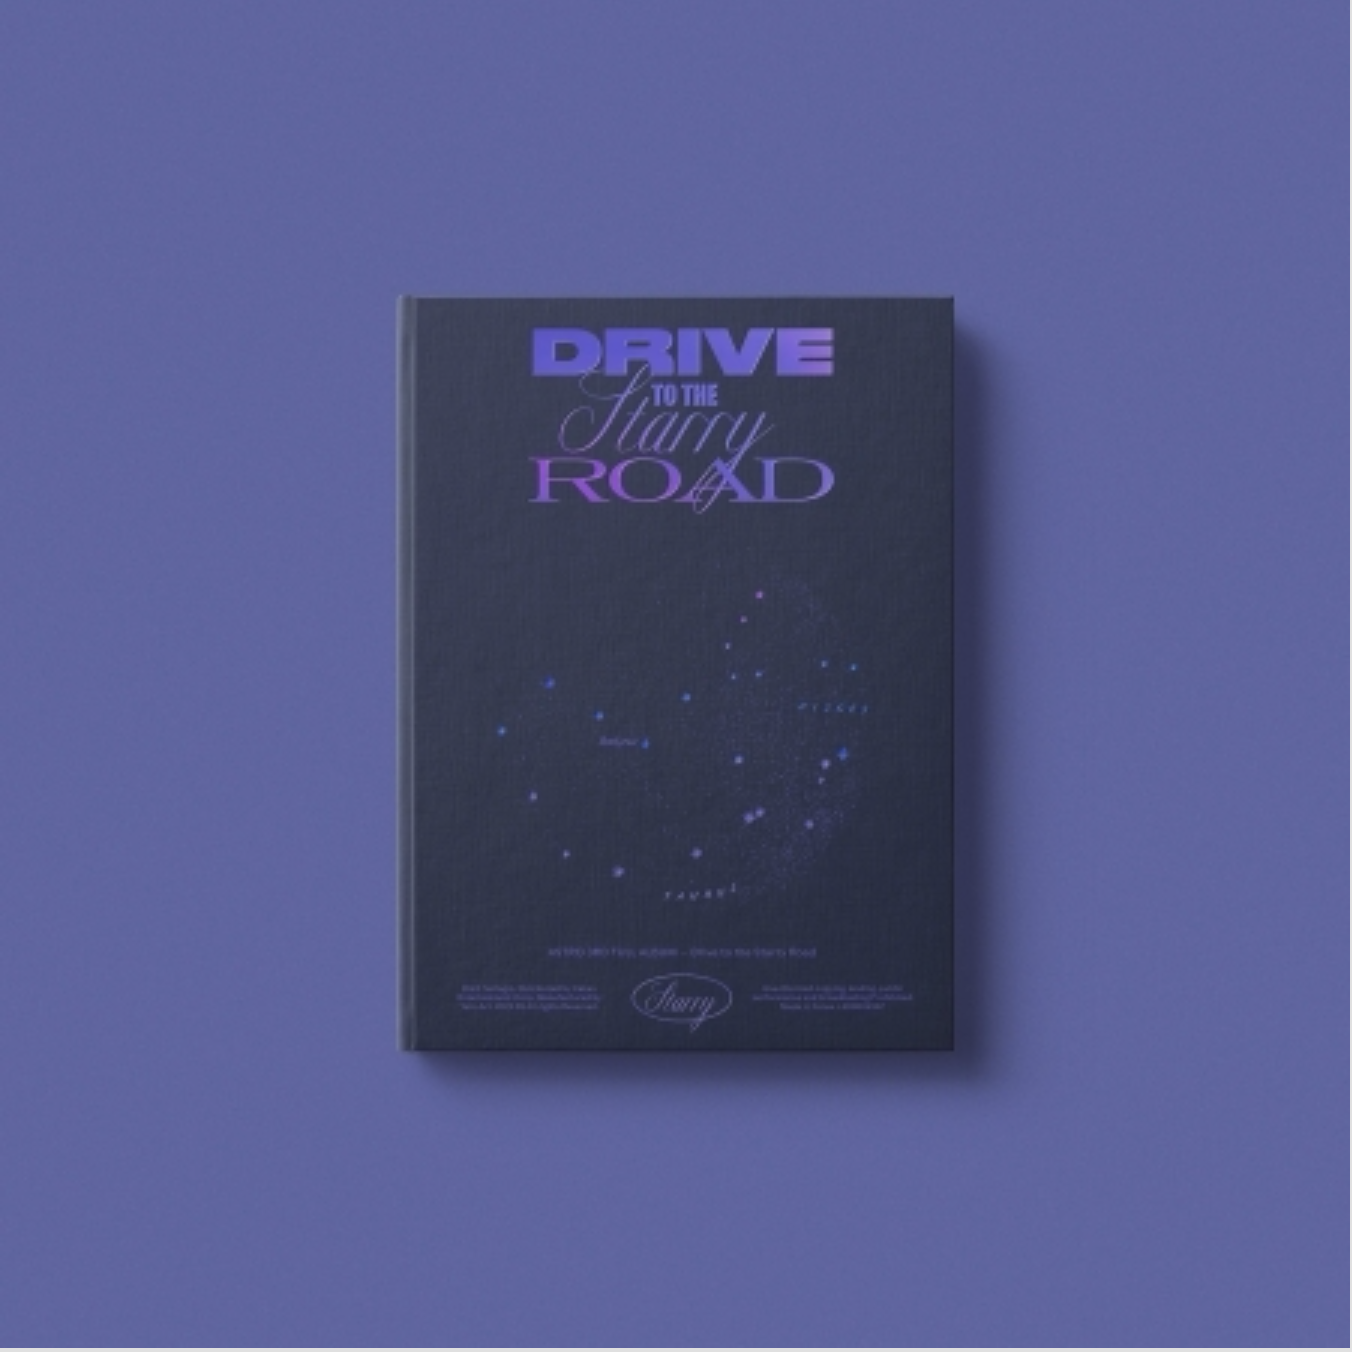 ASTRO - VOL.3 DRIVE TO THE STARRY ROAD (3 VERSIONS)